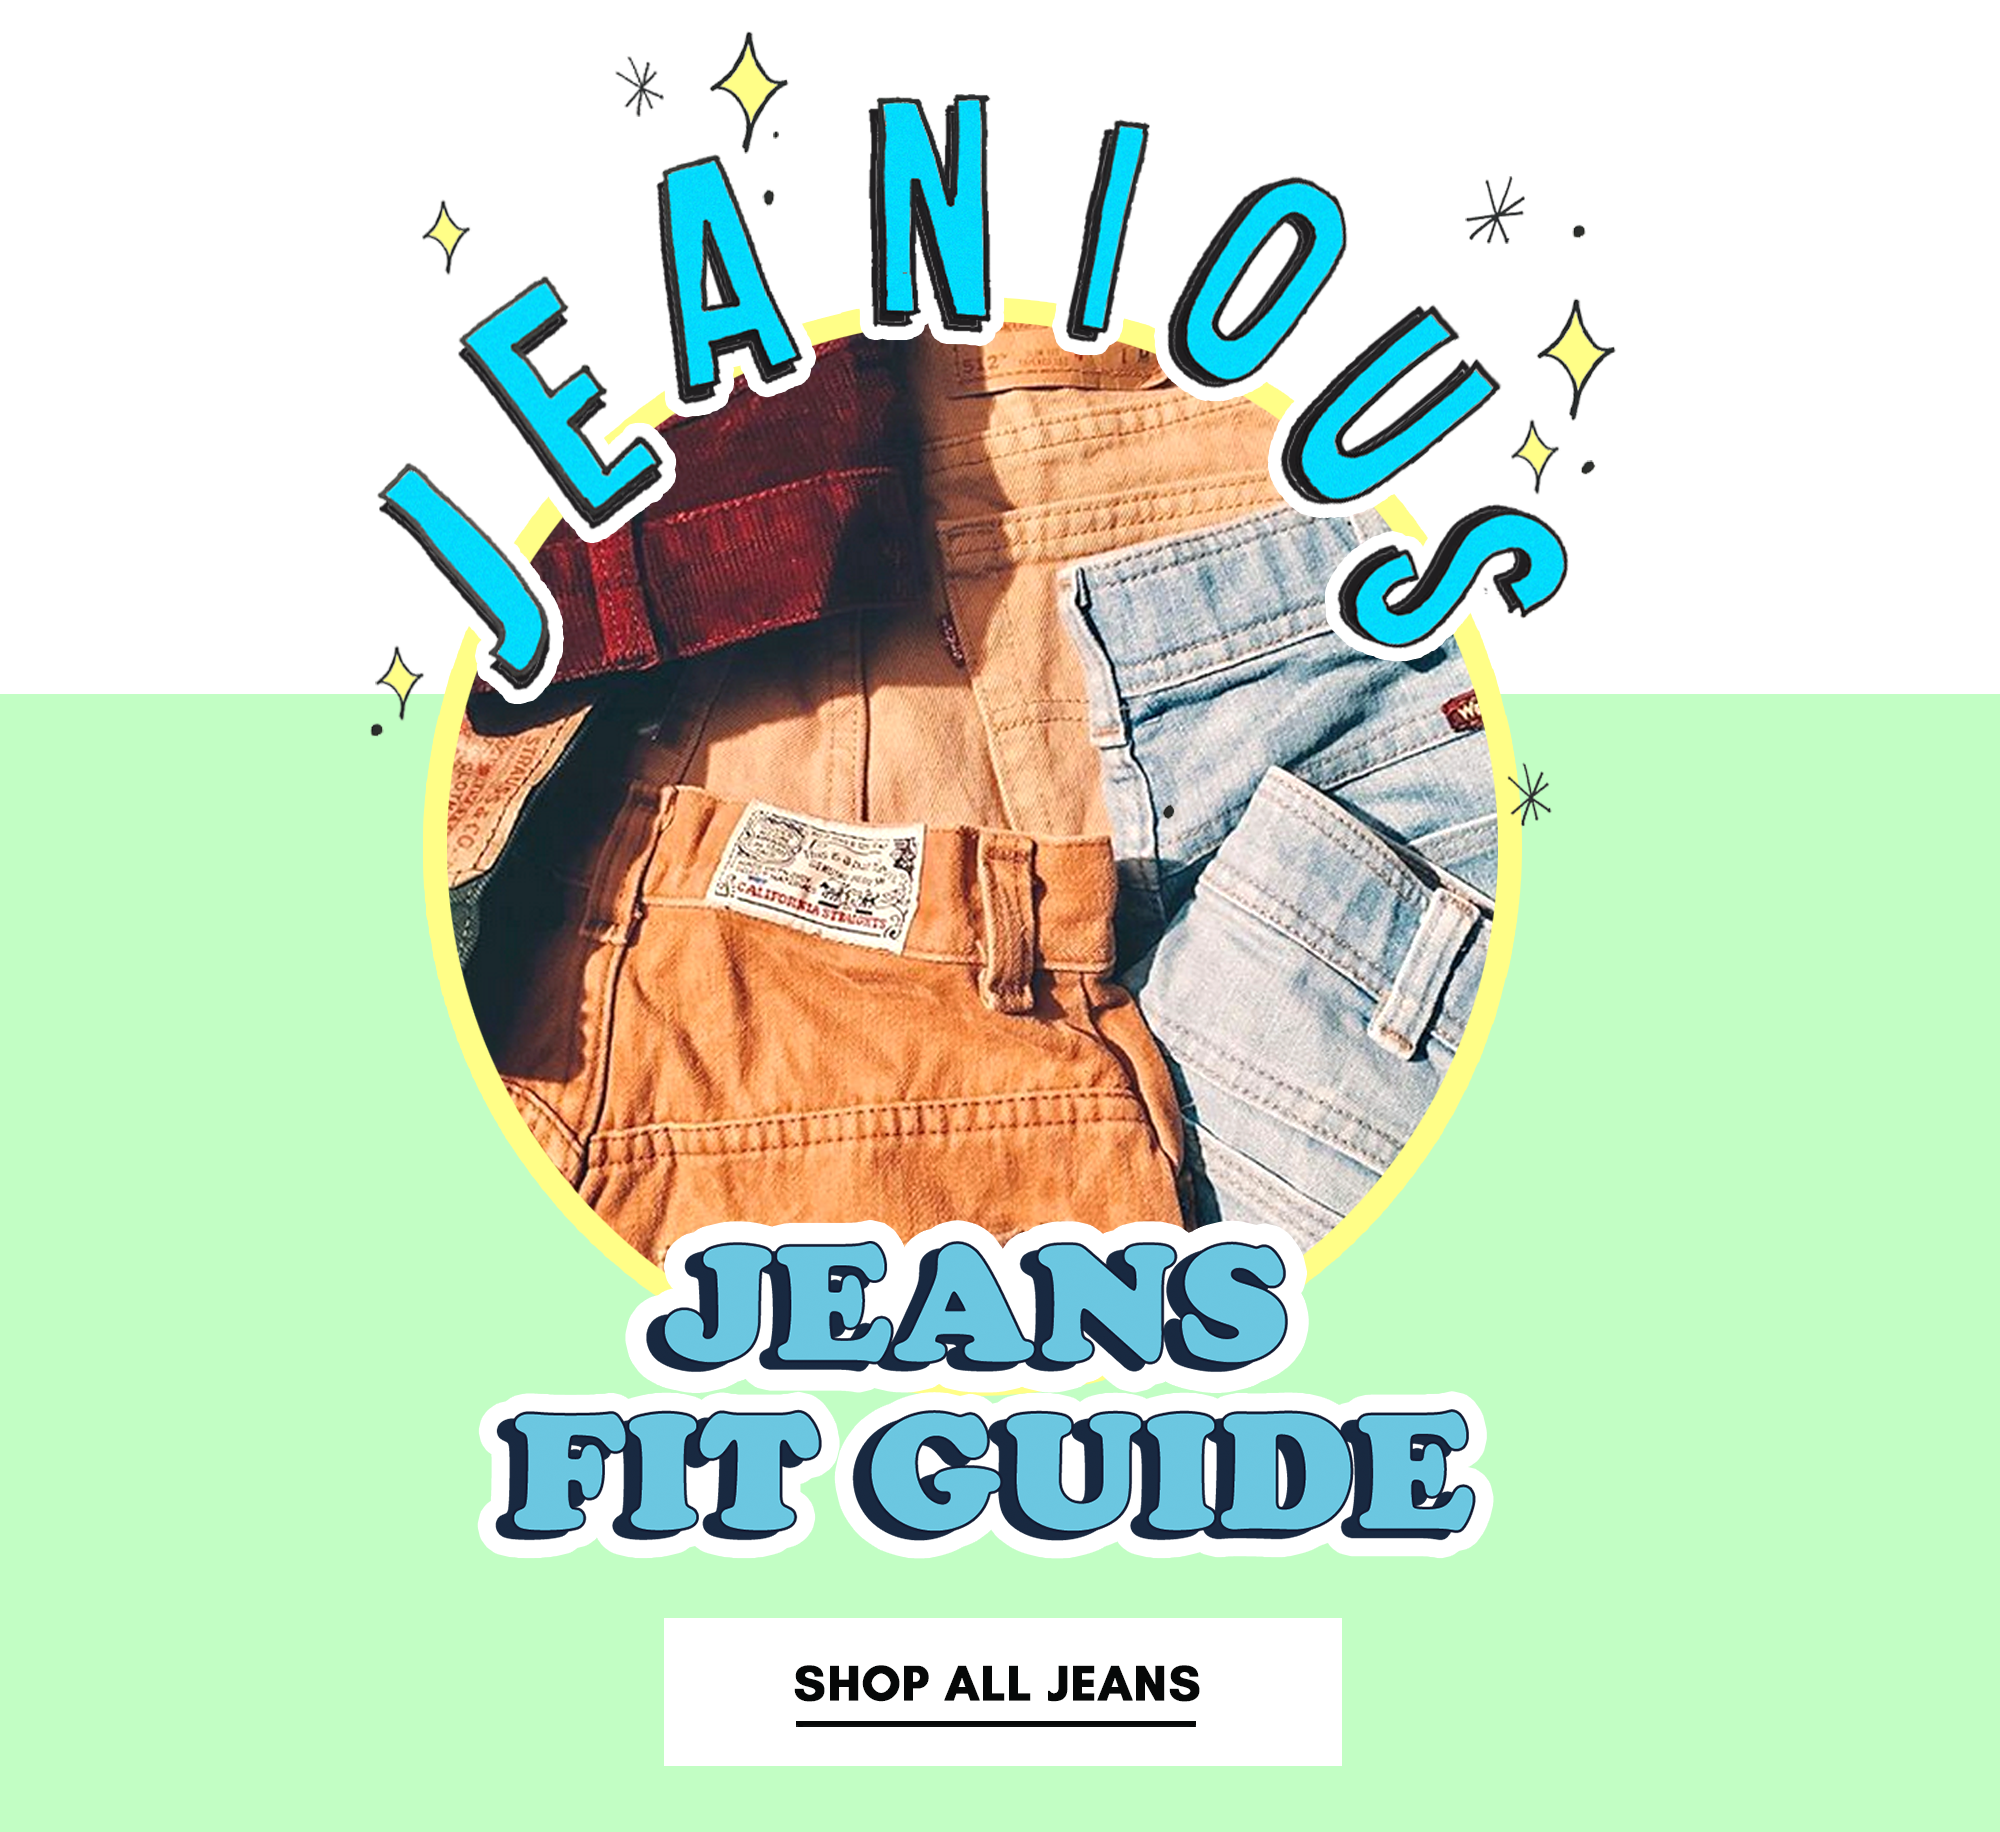 Shop all jeans